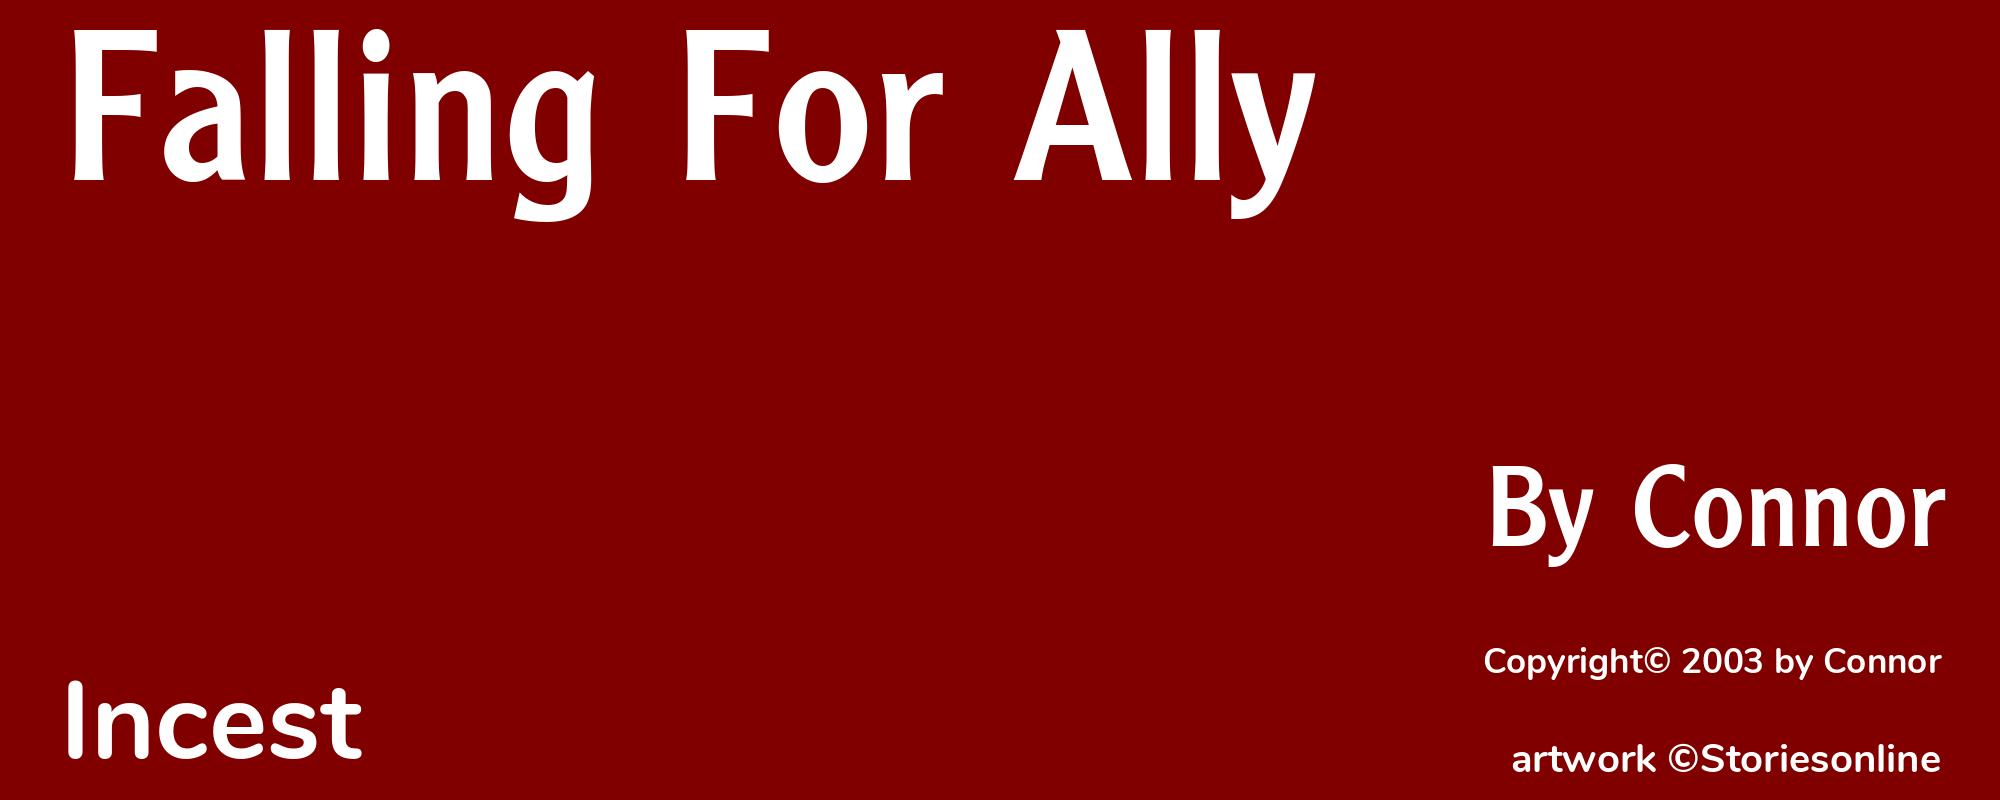 Falling For Ally - Cover